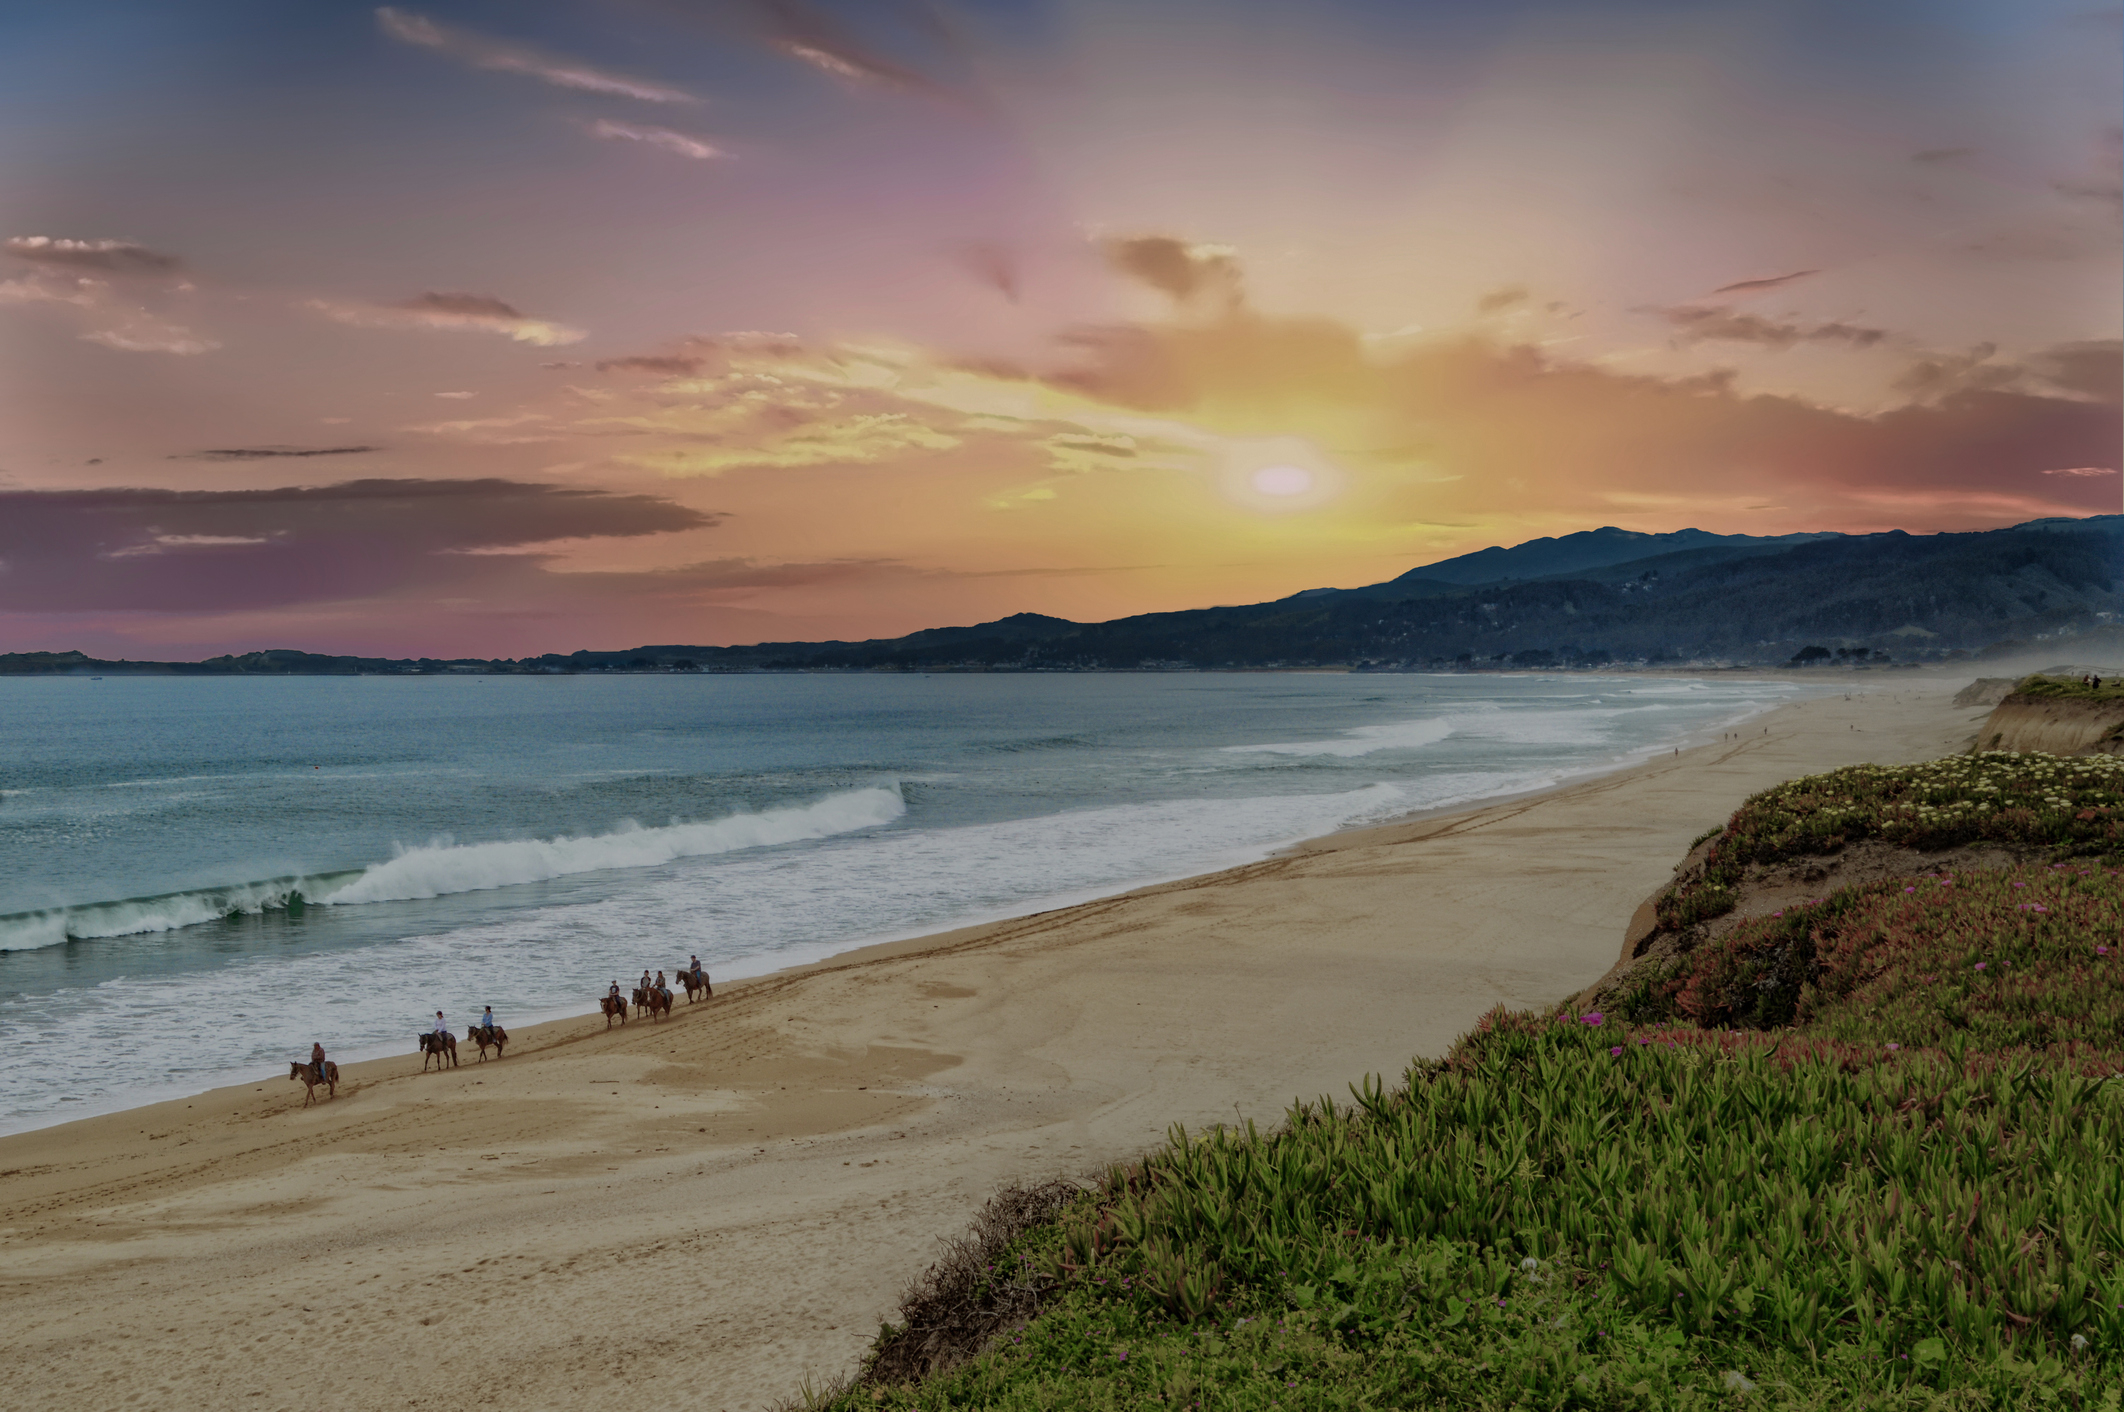 Sunset at a beach with people and horses walking along the shore, mountains in the distance